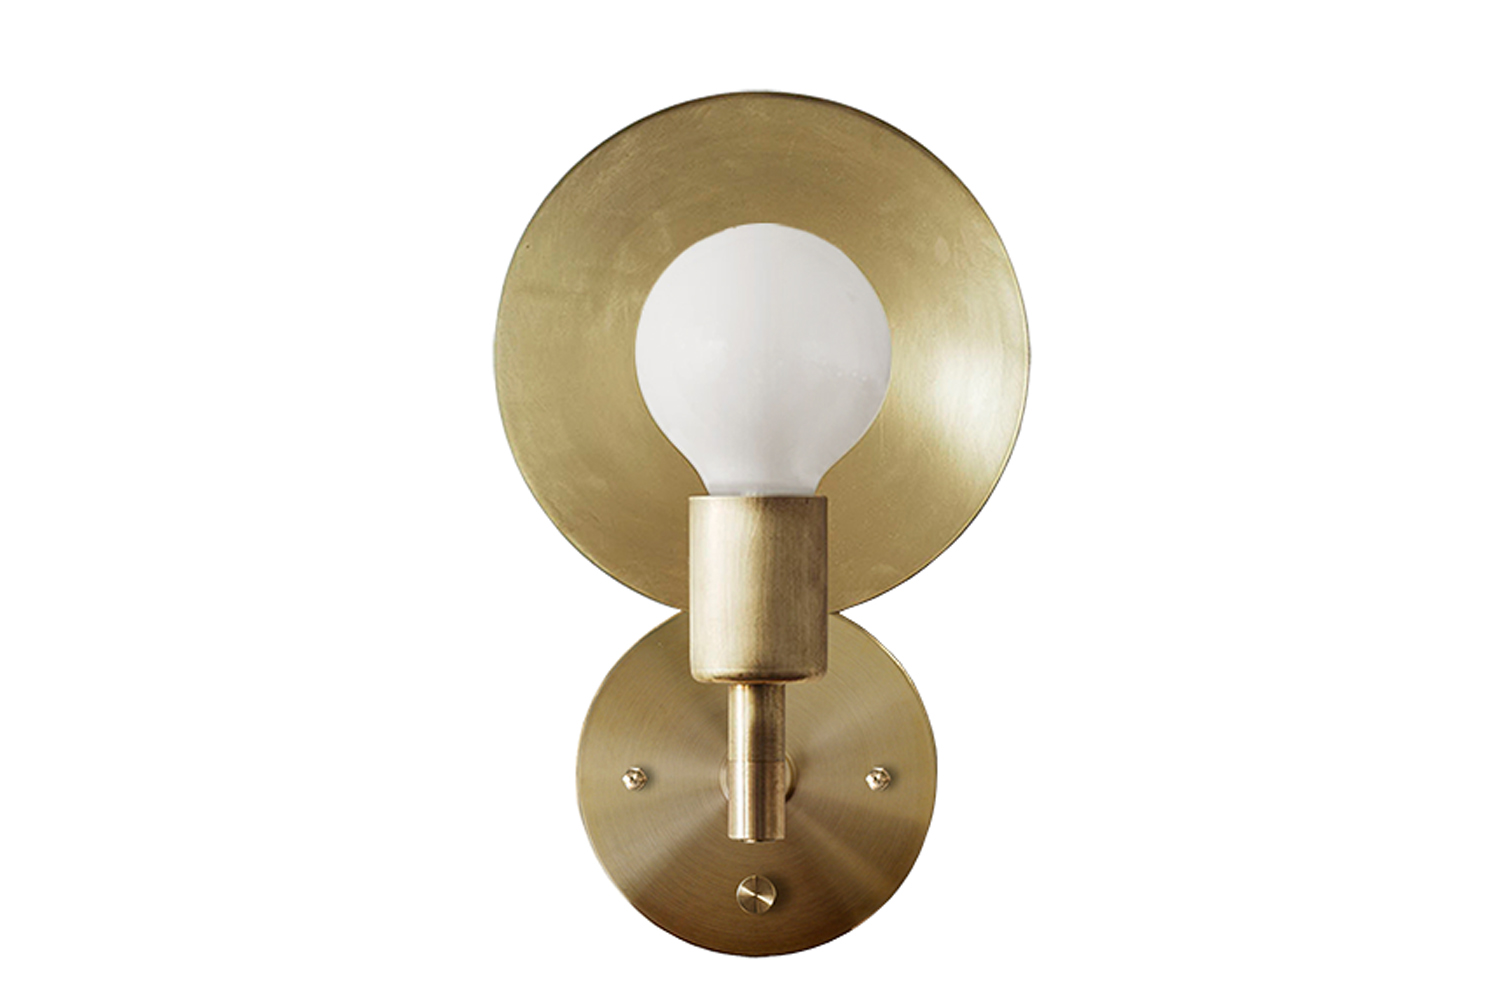 Introducing the Orbit sconce from Workstead 